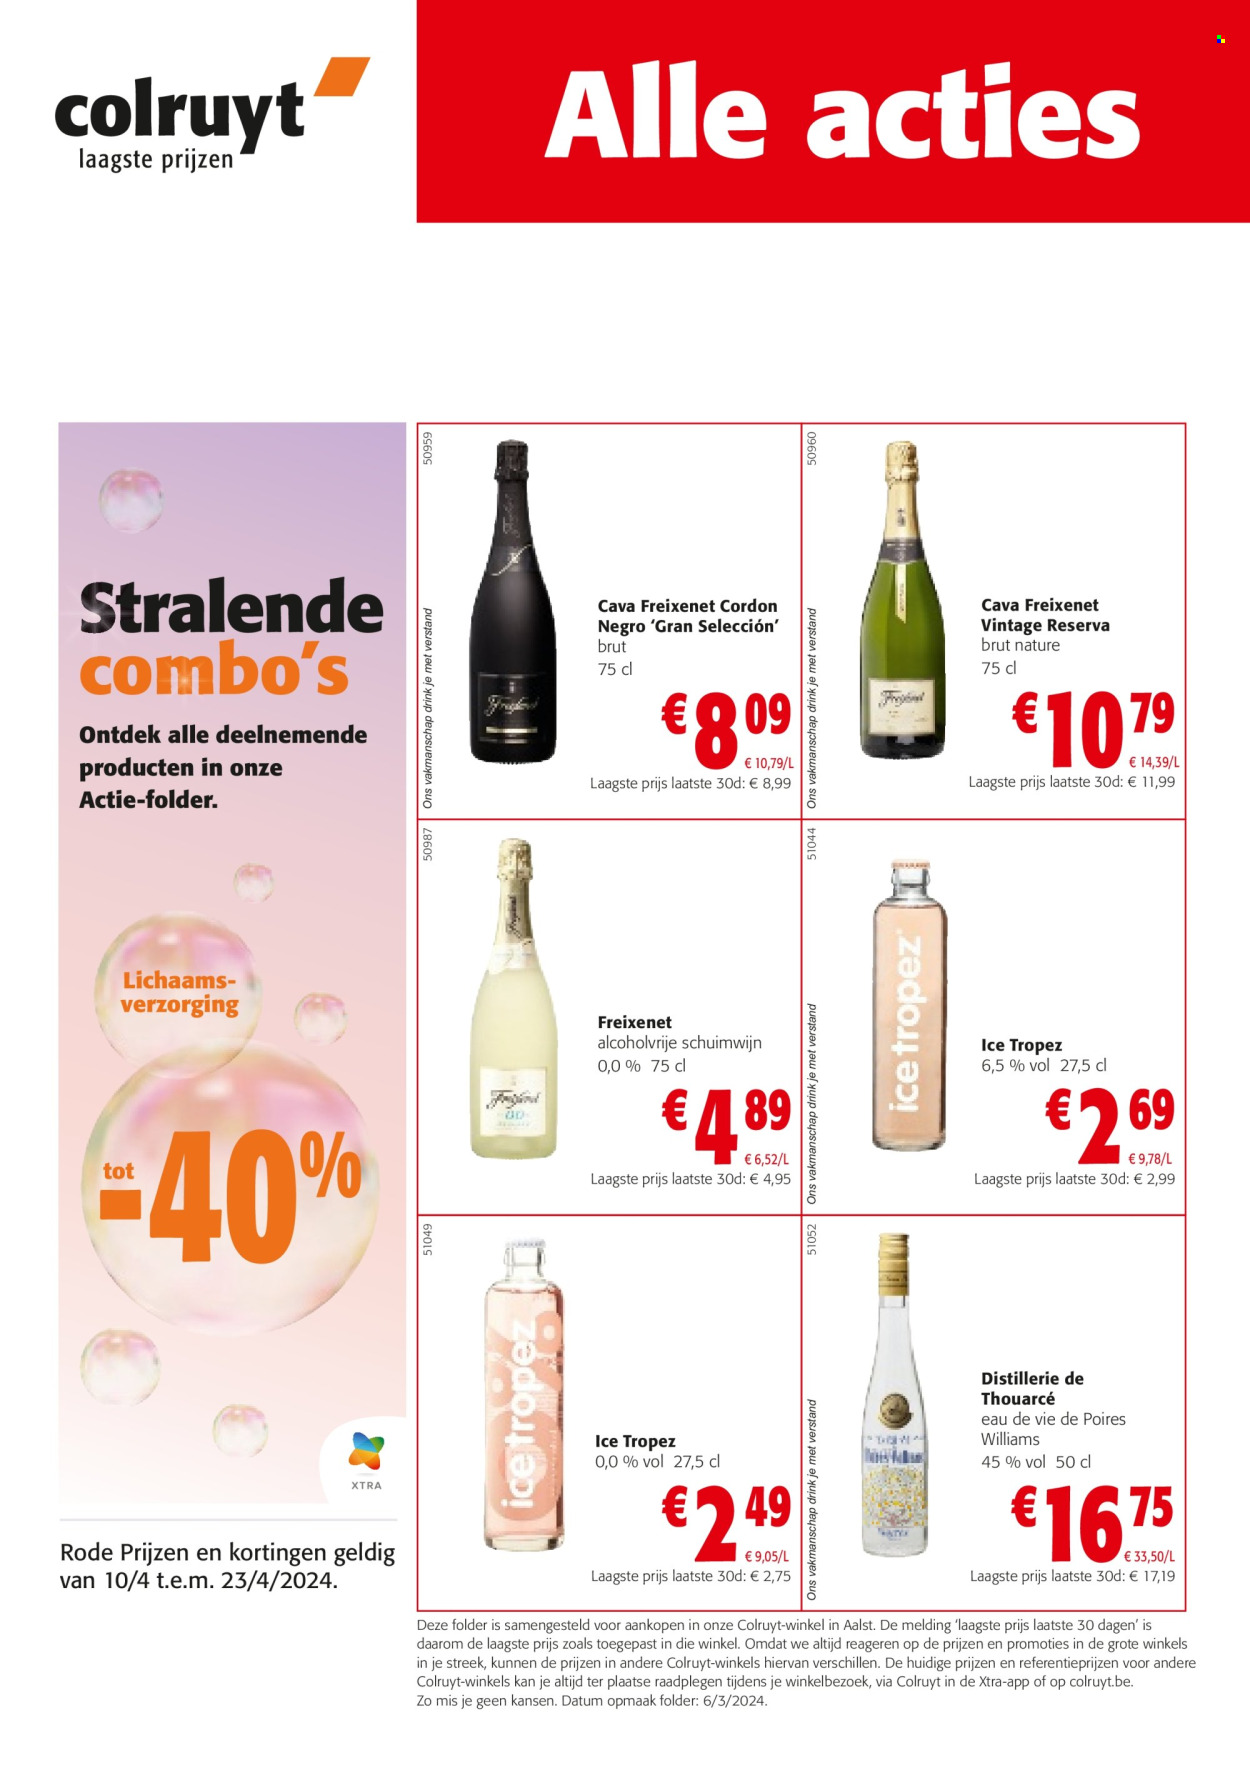 Catalogue Colruyt - 10.4.2024 - 23.4.2024. Page 1.